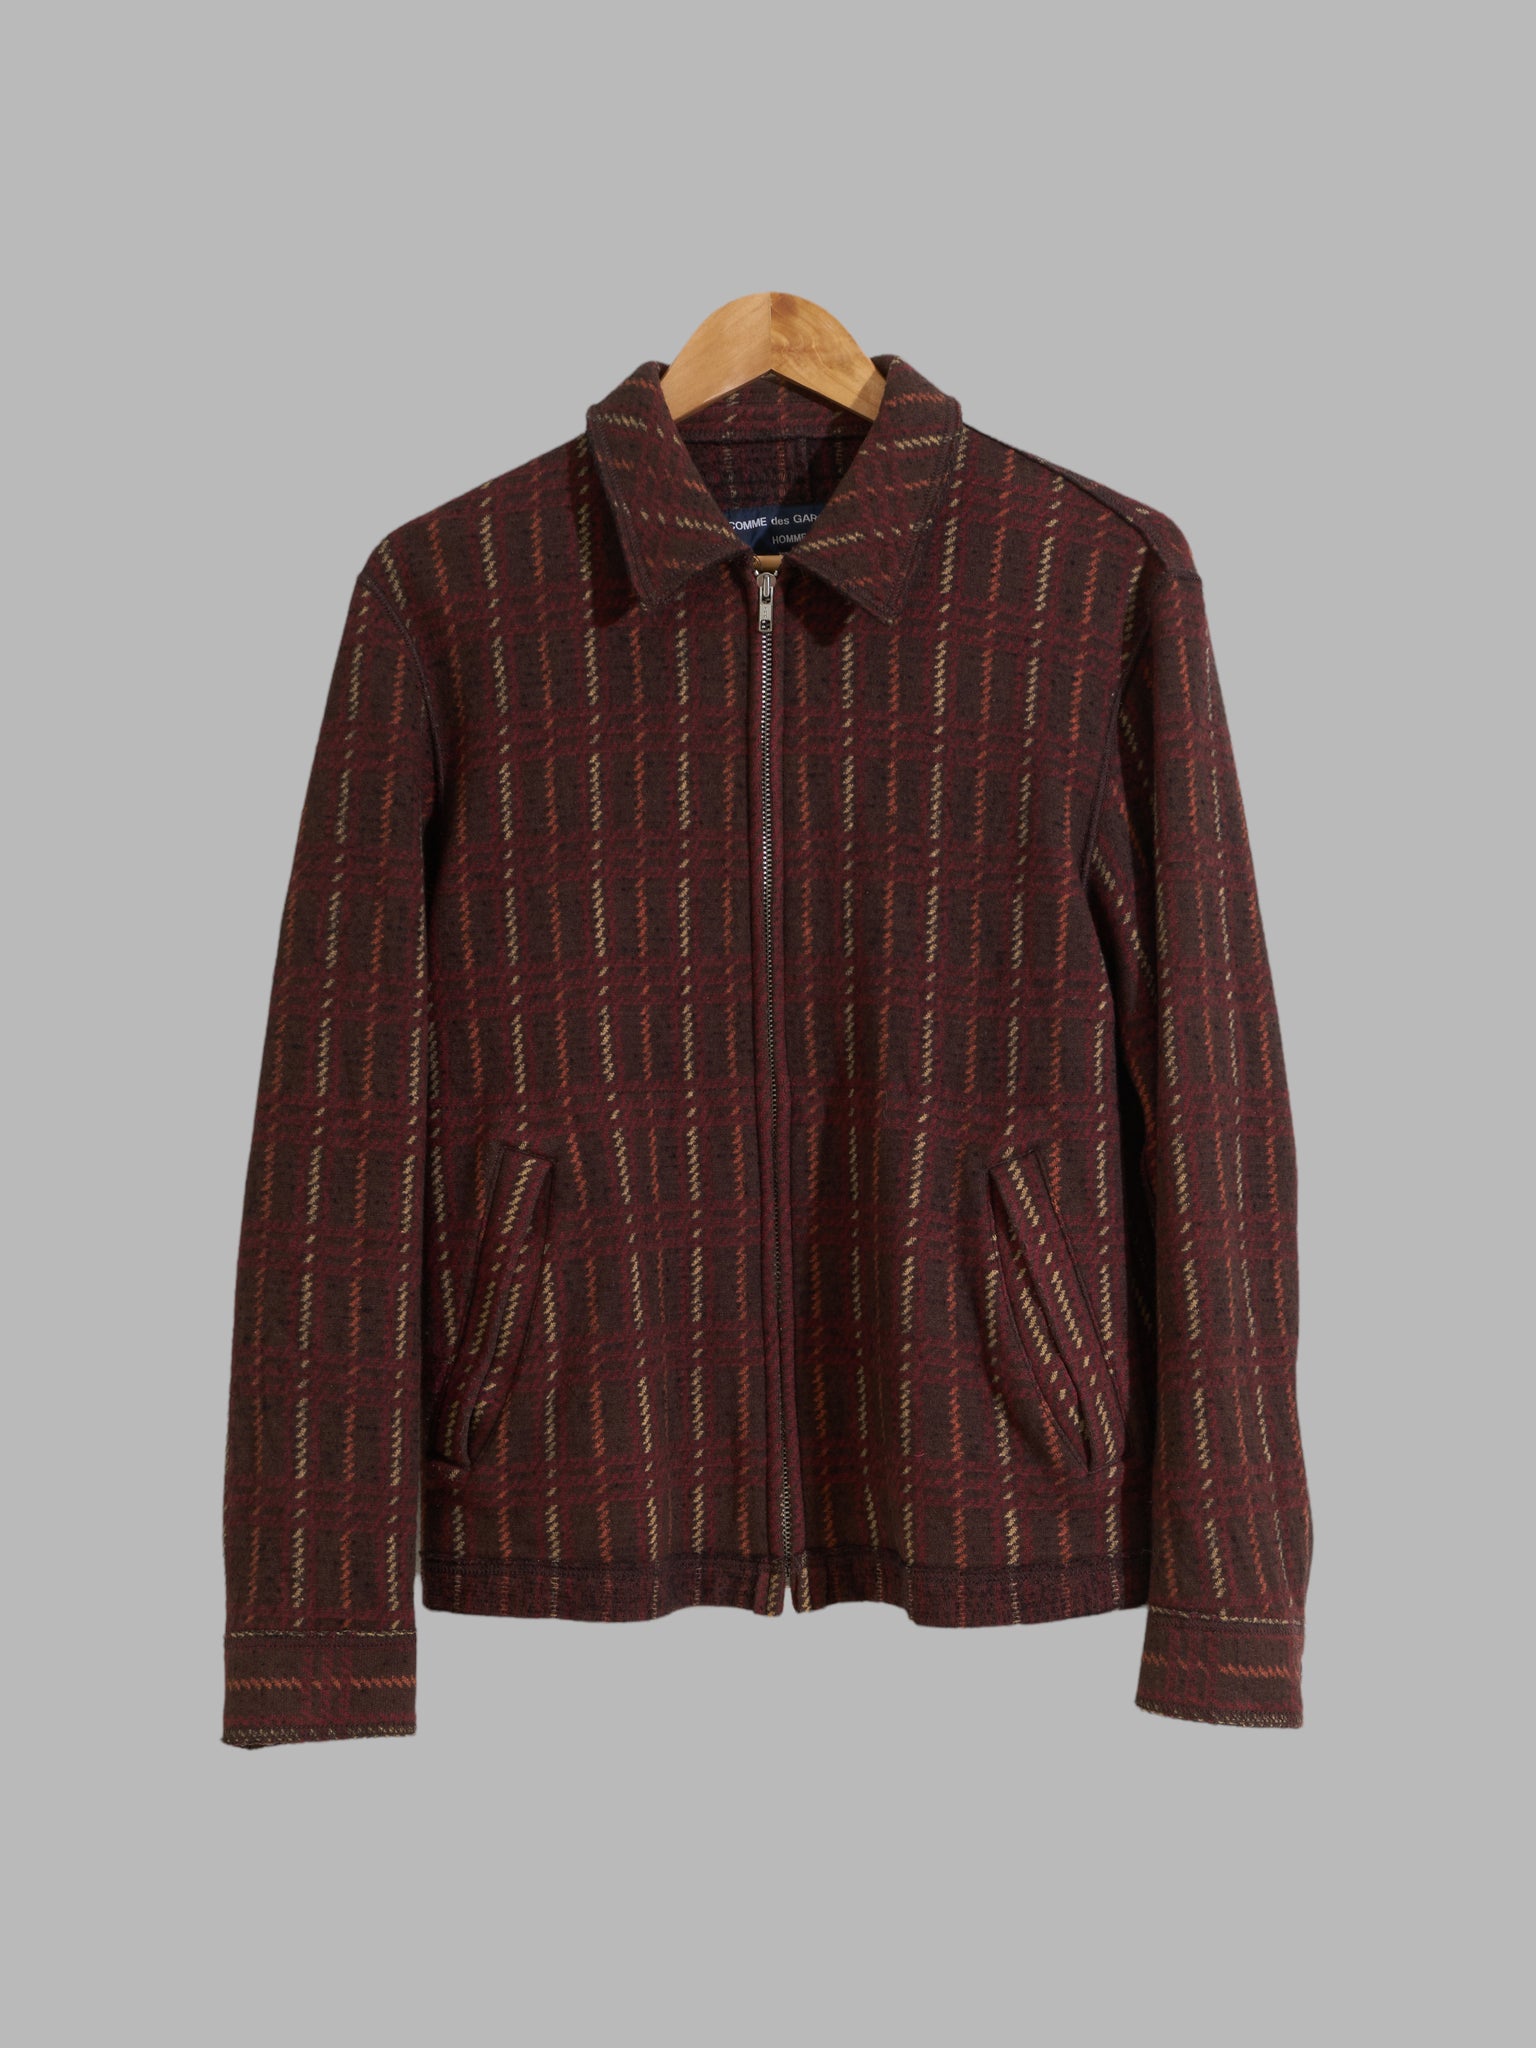 Comme des Garcons Homme 2004 brown wool striped zip jacket - S